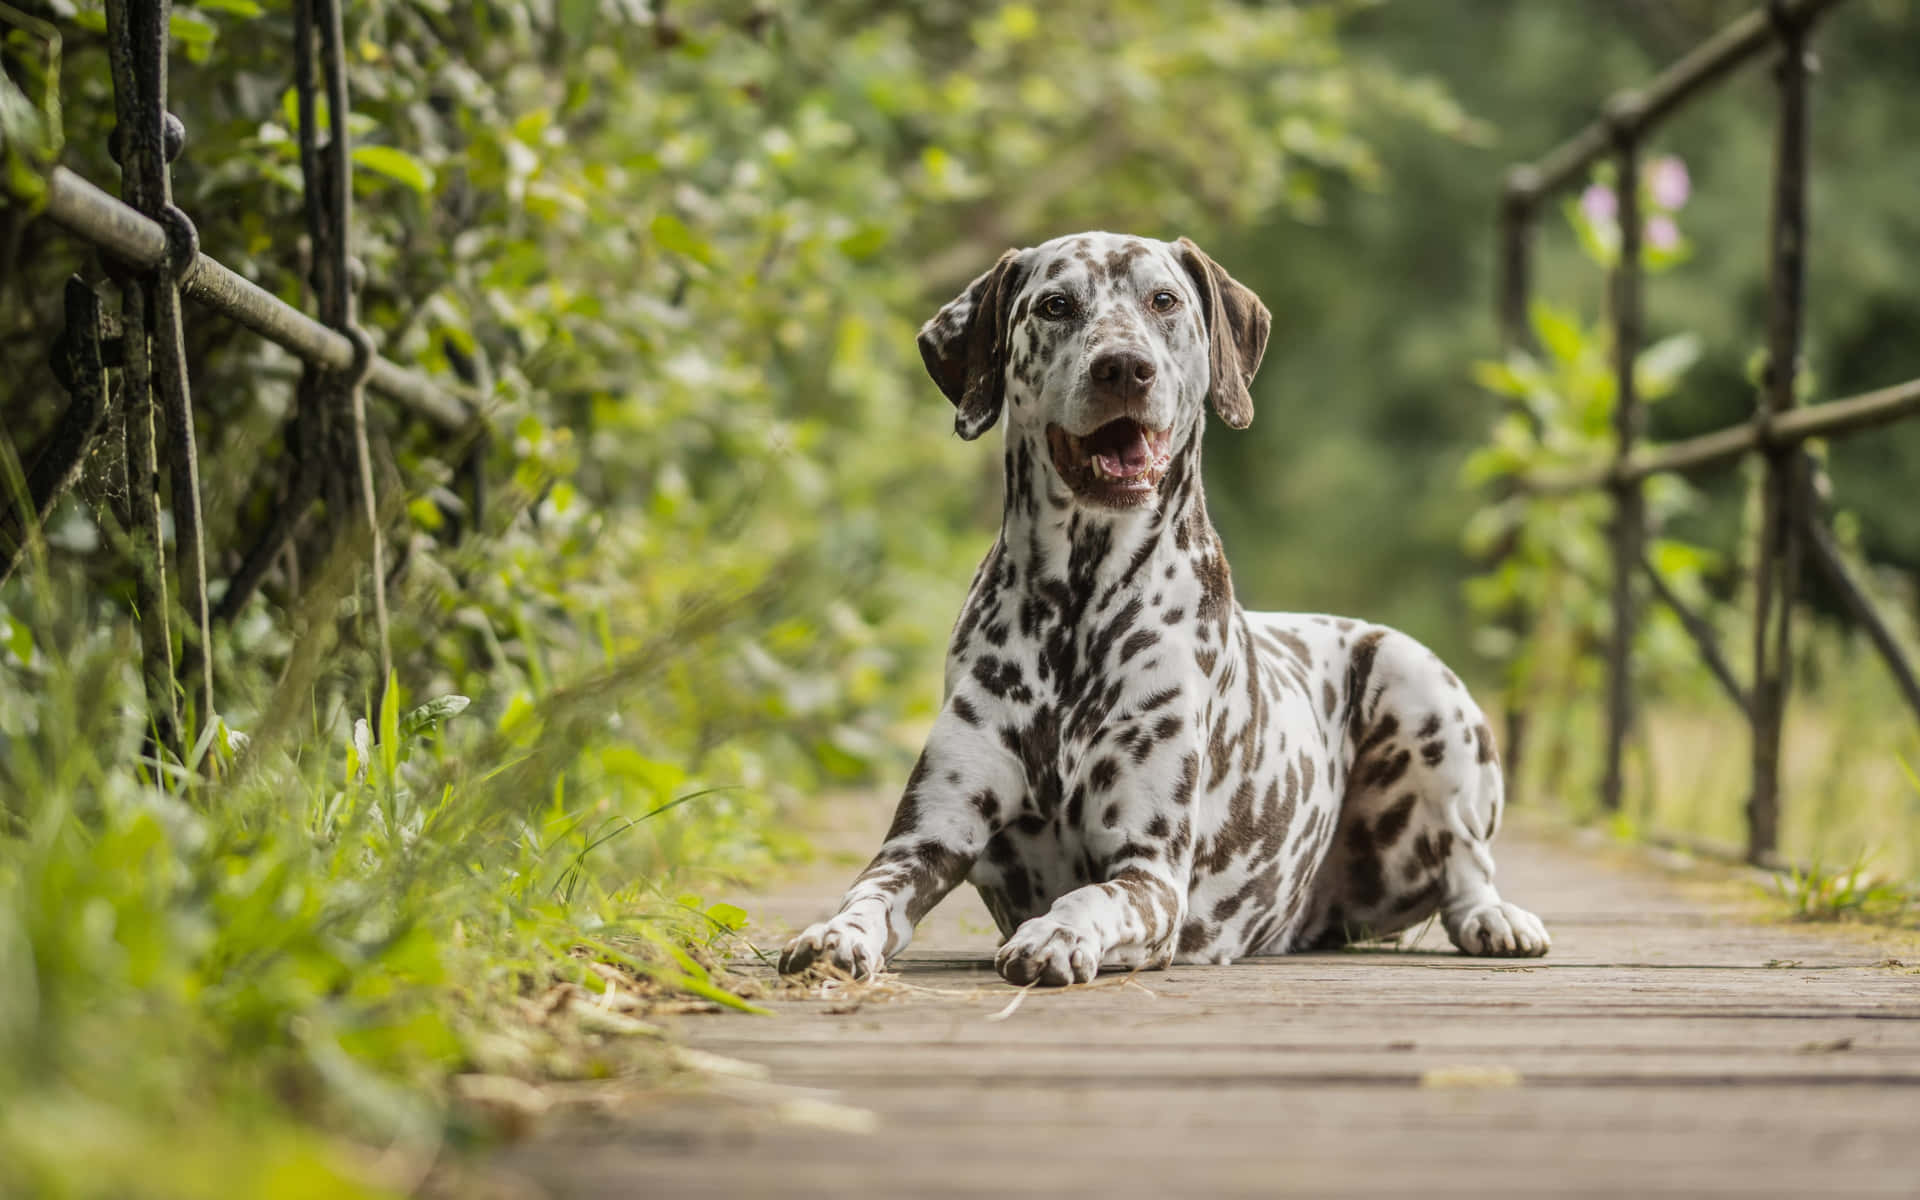 Adorable Dalmatian pup resting in the grass